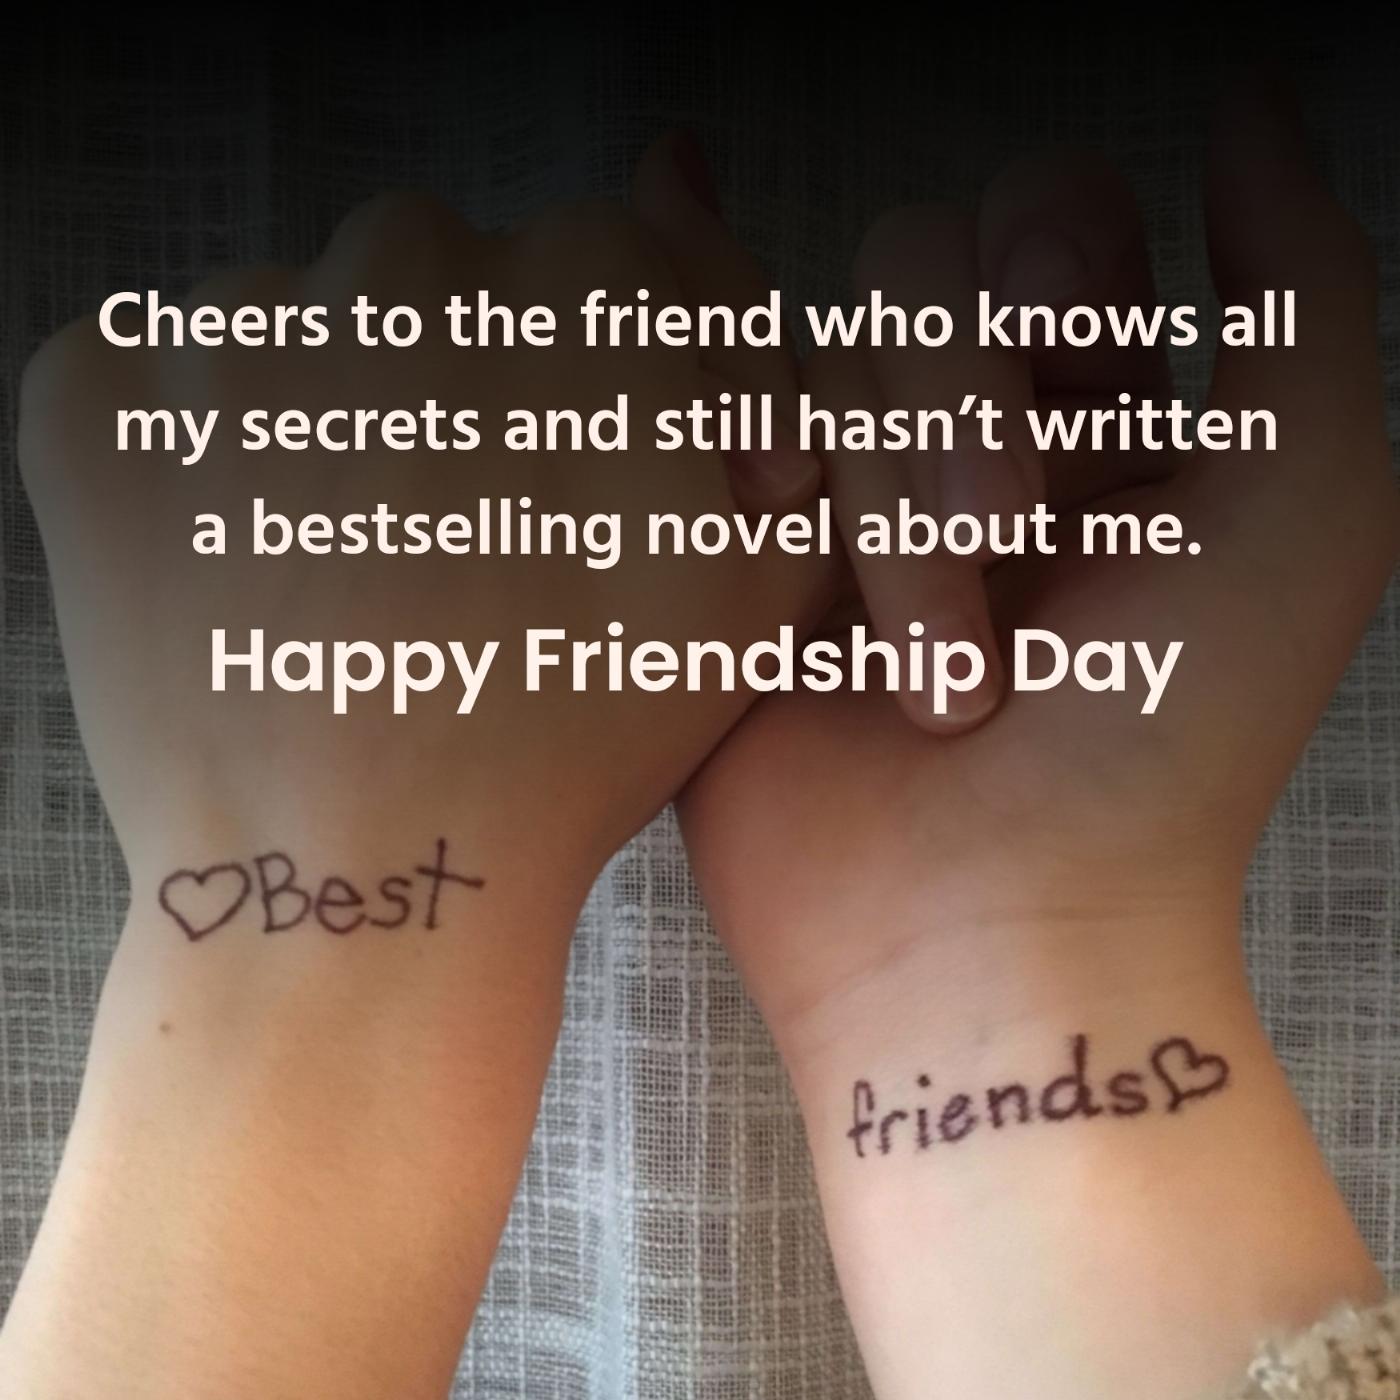 Cheers to the friend who knows all my secrets and still hasnt written a bestselling novel